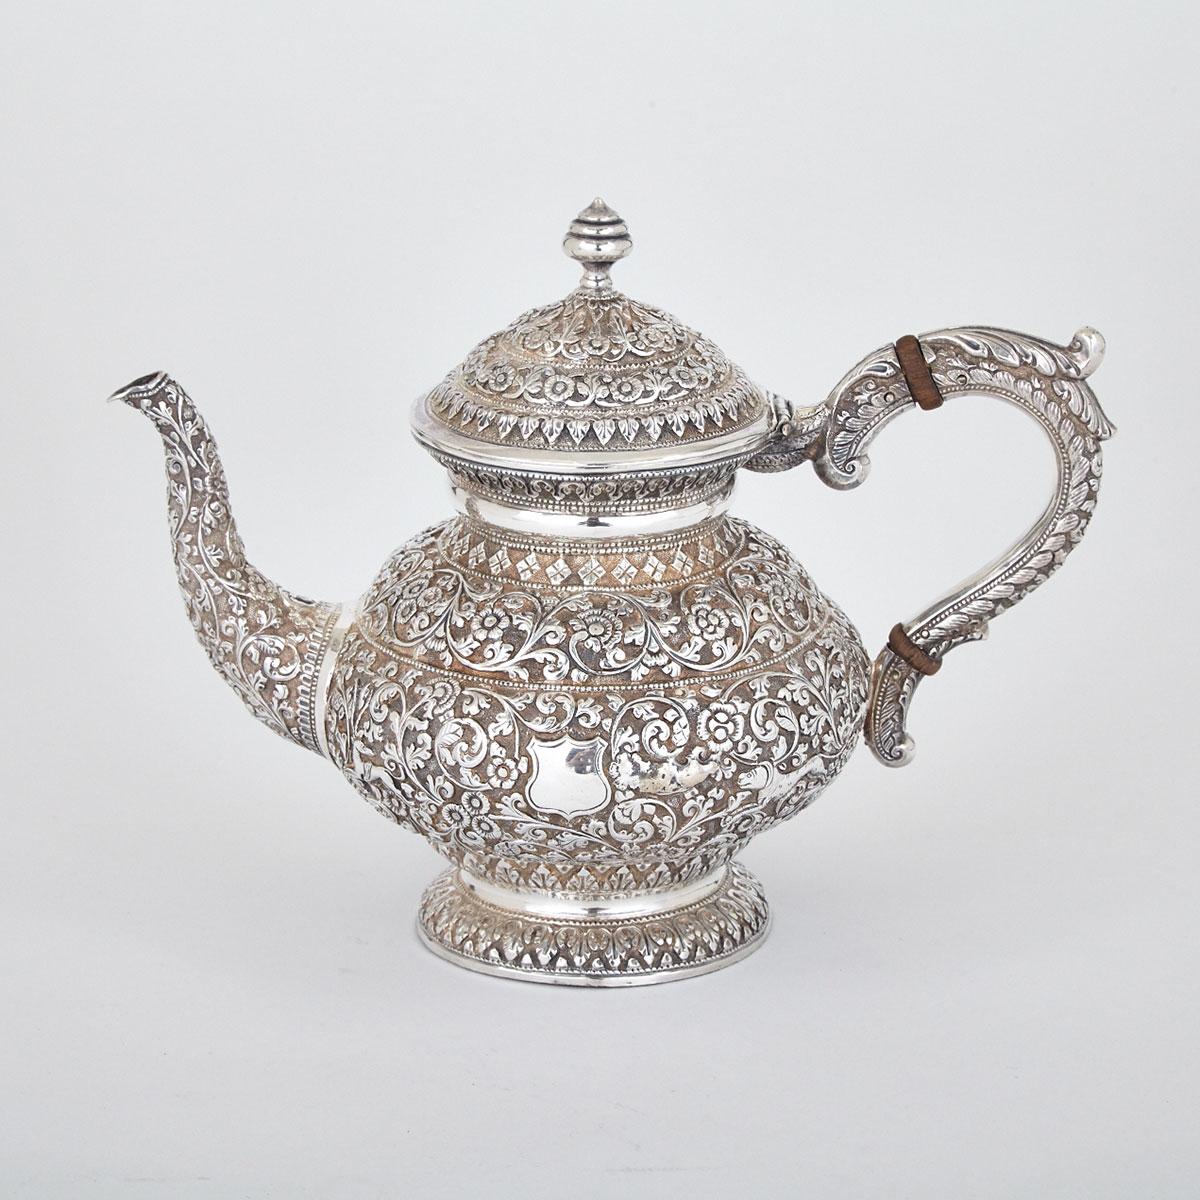 Indian Silver Teapot, late 19th century